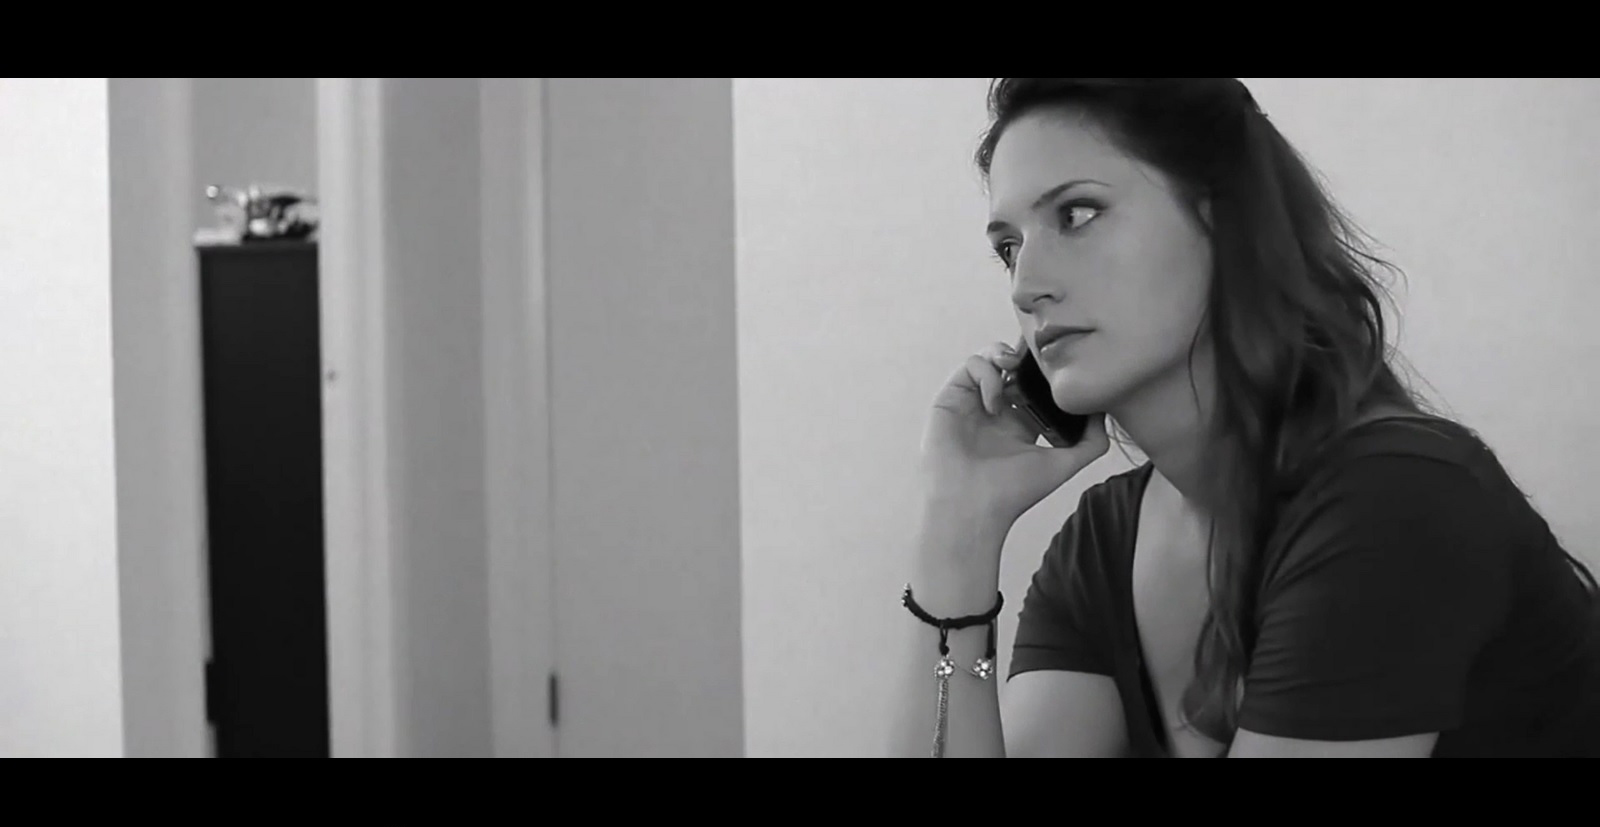 Still from the short film Two Lines of Vagary